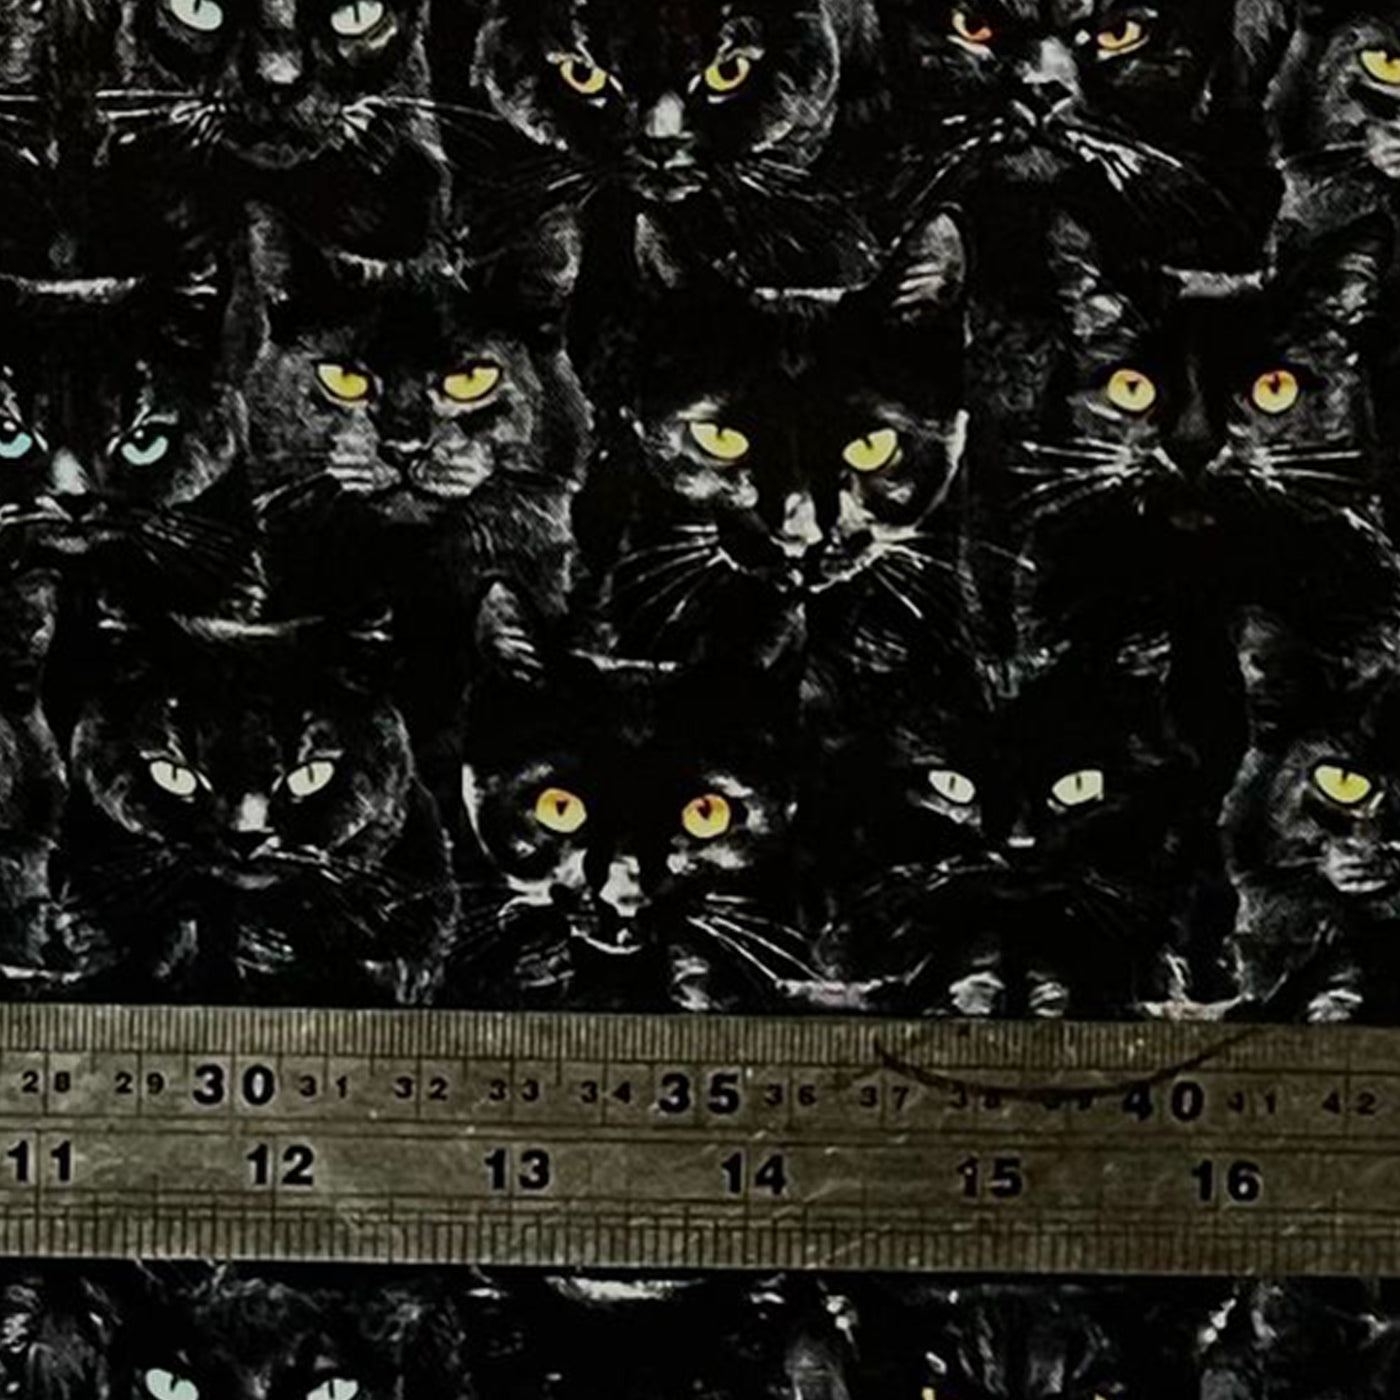 Lucky Black cats in rows on our handmade bandana 100% cotton.